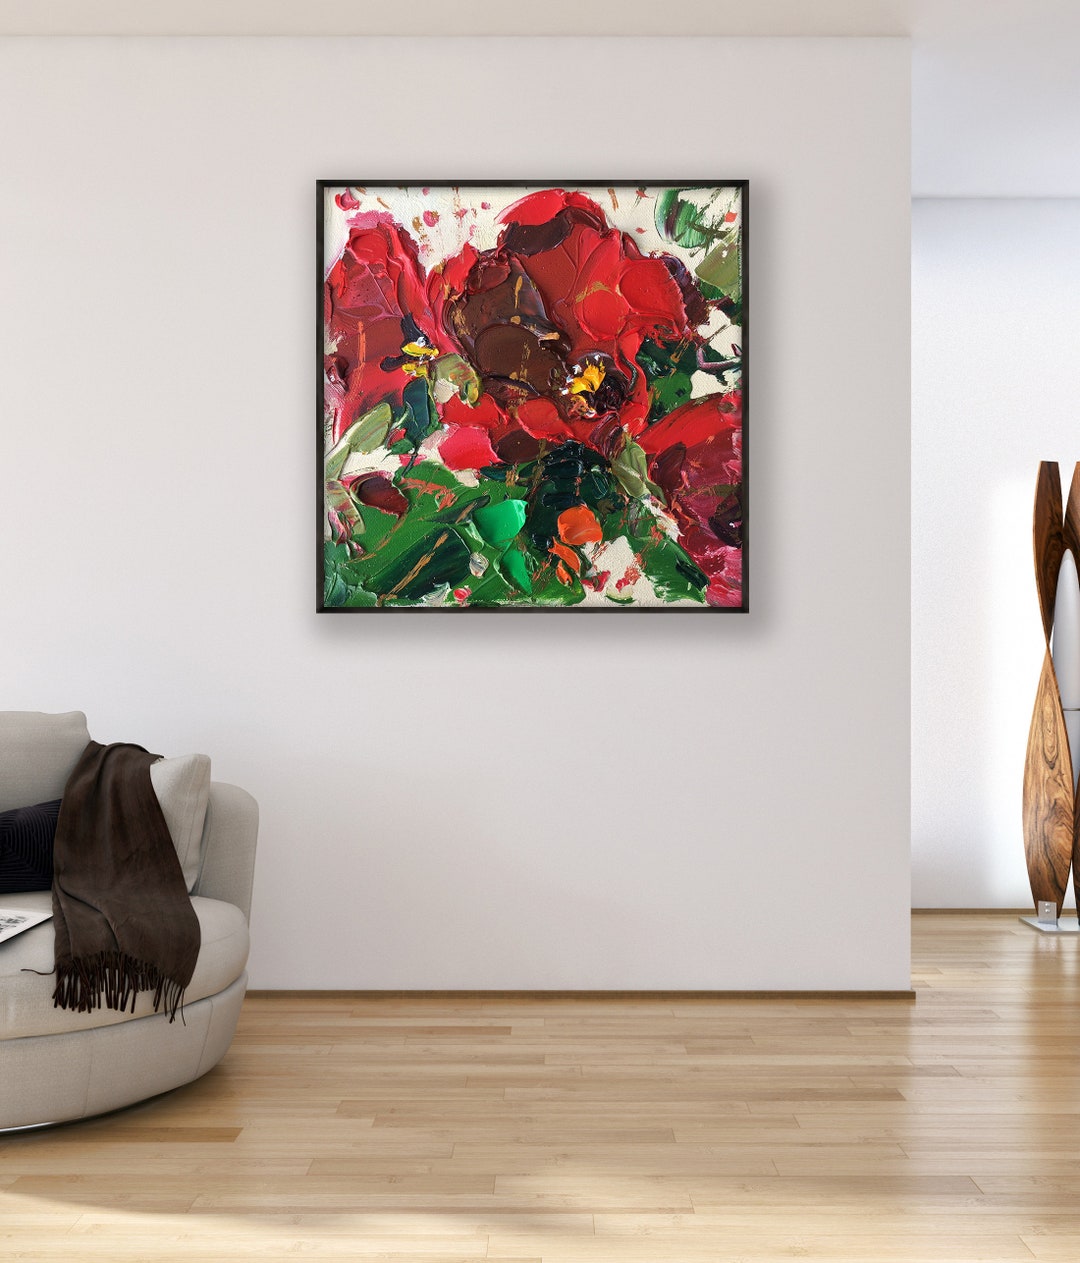 Poppies Painting on Canvas Original Art Red Flowers - Etsy